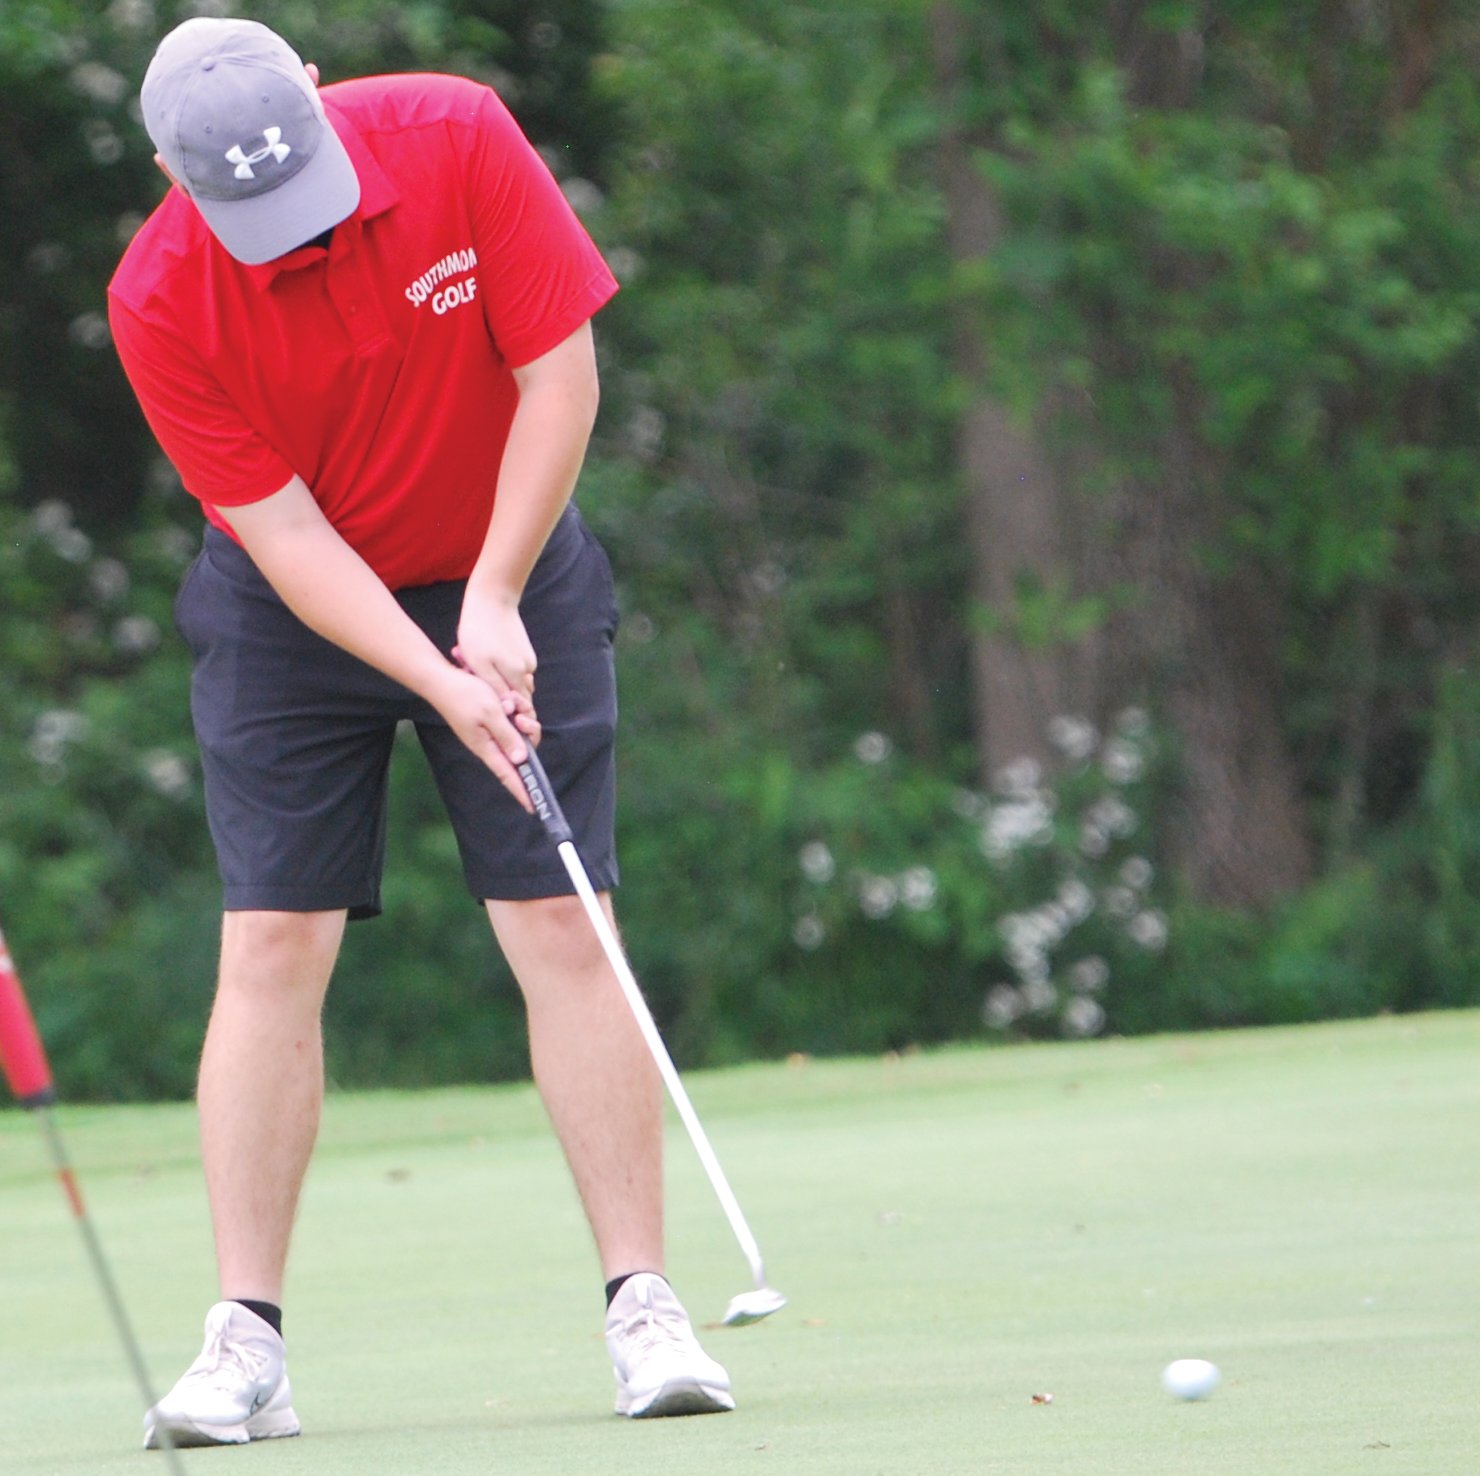 Nolan Allen led Southmont with an 81 at the county meet on Thursday.